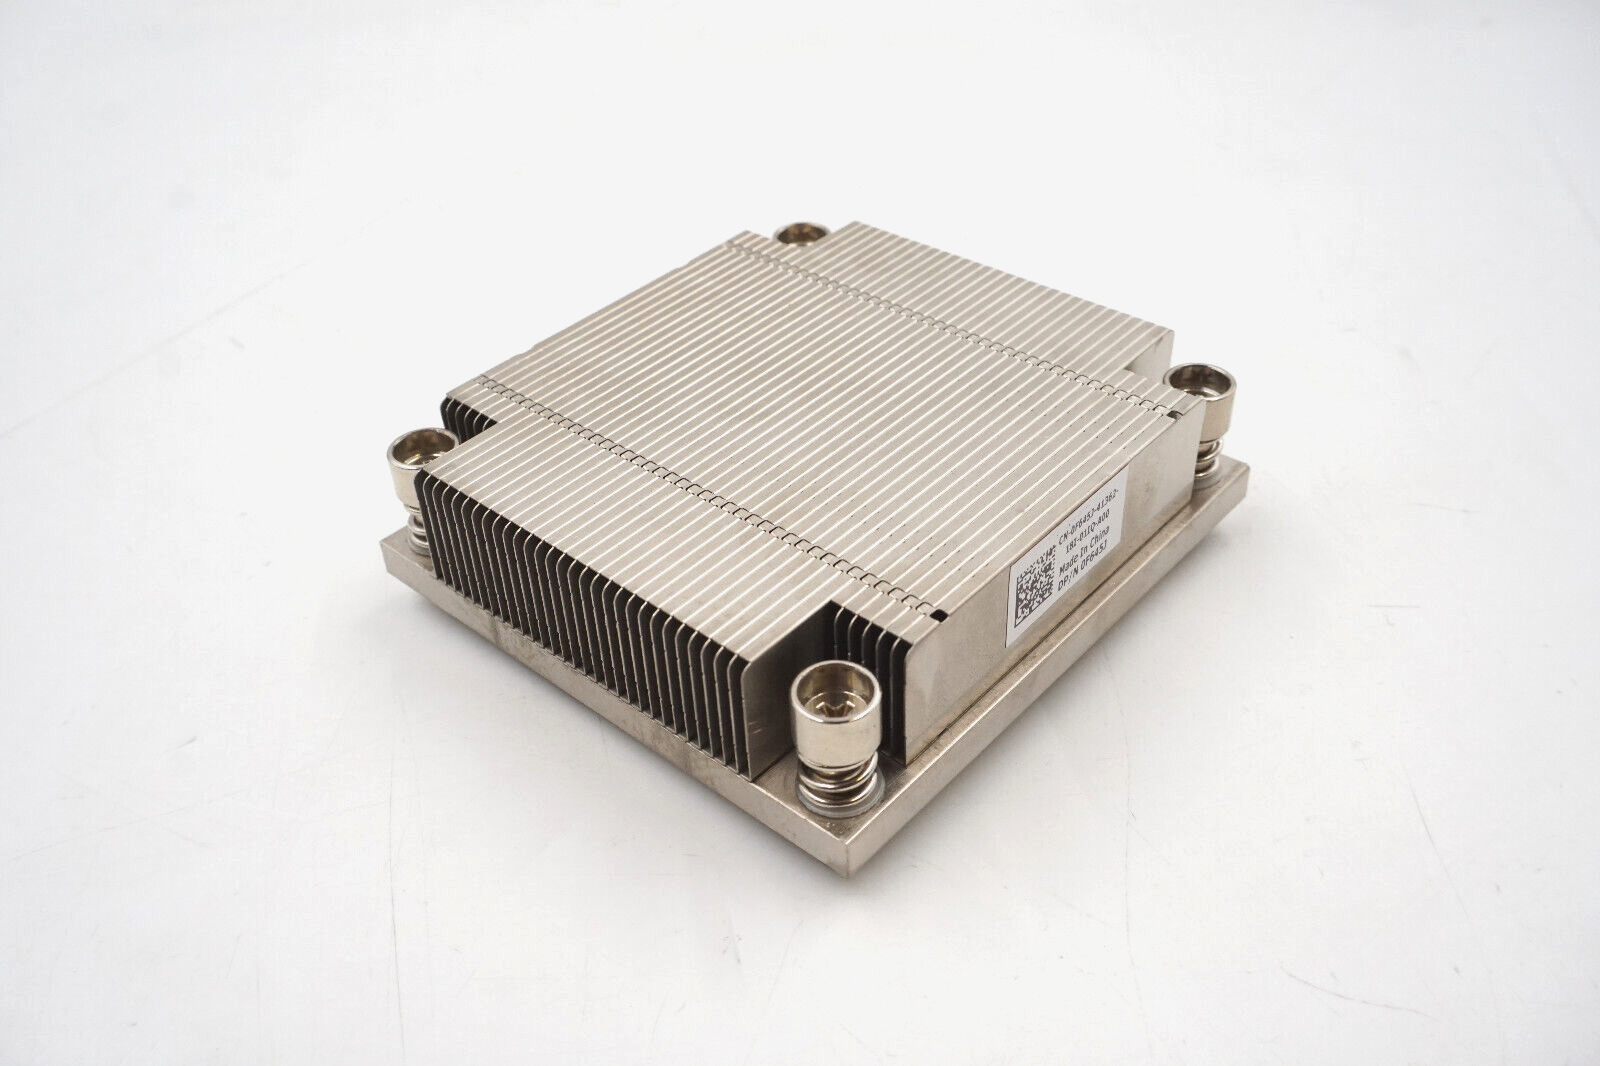 Dell PowerEdge R310 R410 Server CPU Cooling Heatsink Dell P/N: 0F645J Tested